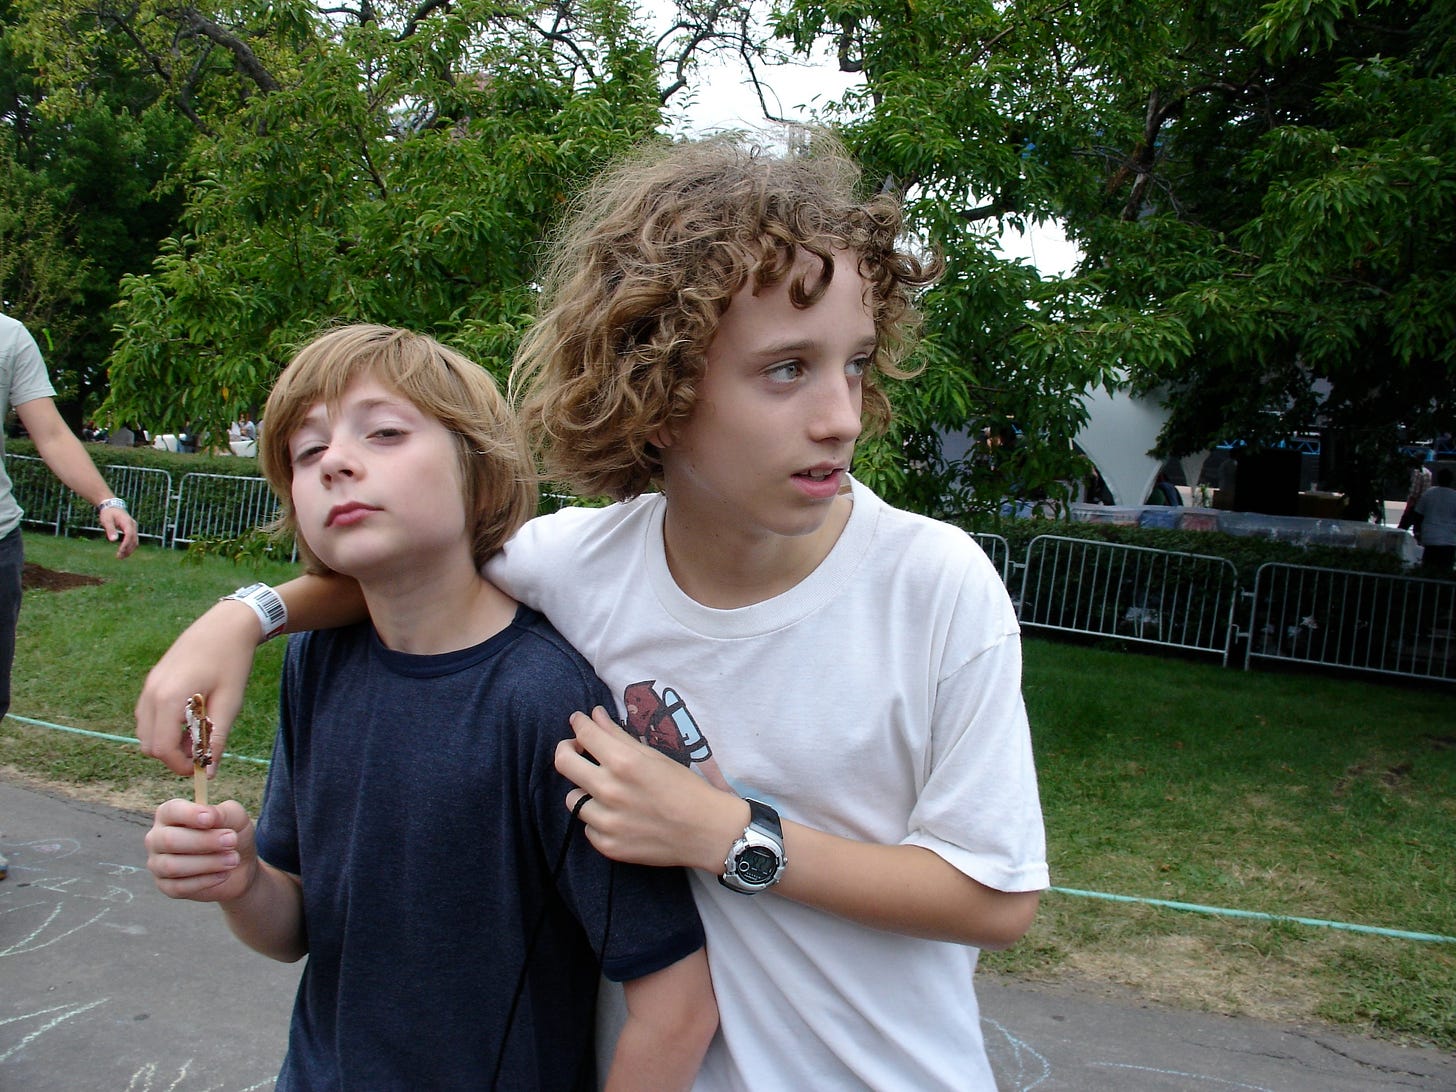 Henry with his arm around me at Lollapalooza in 2007.